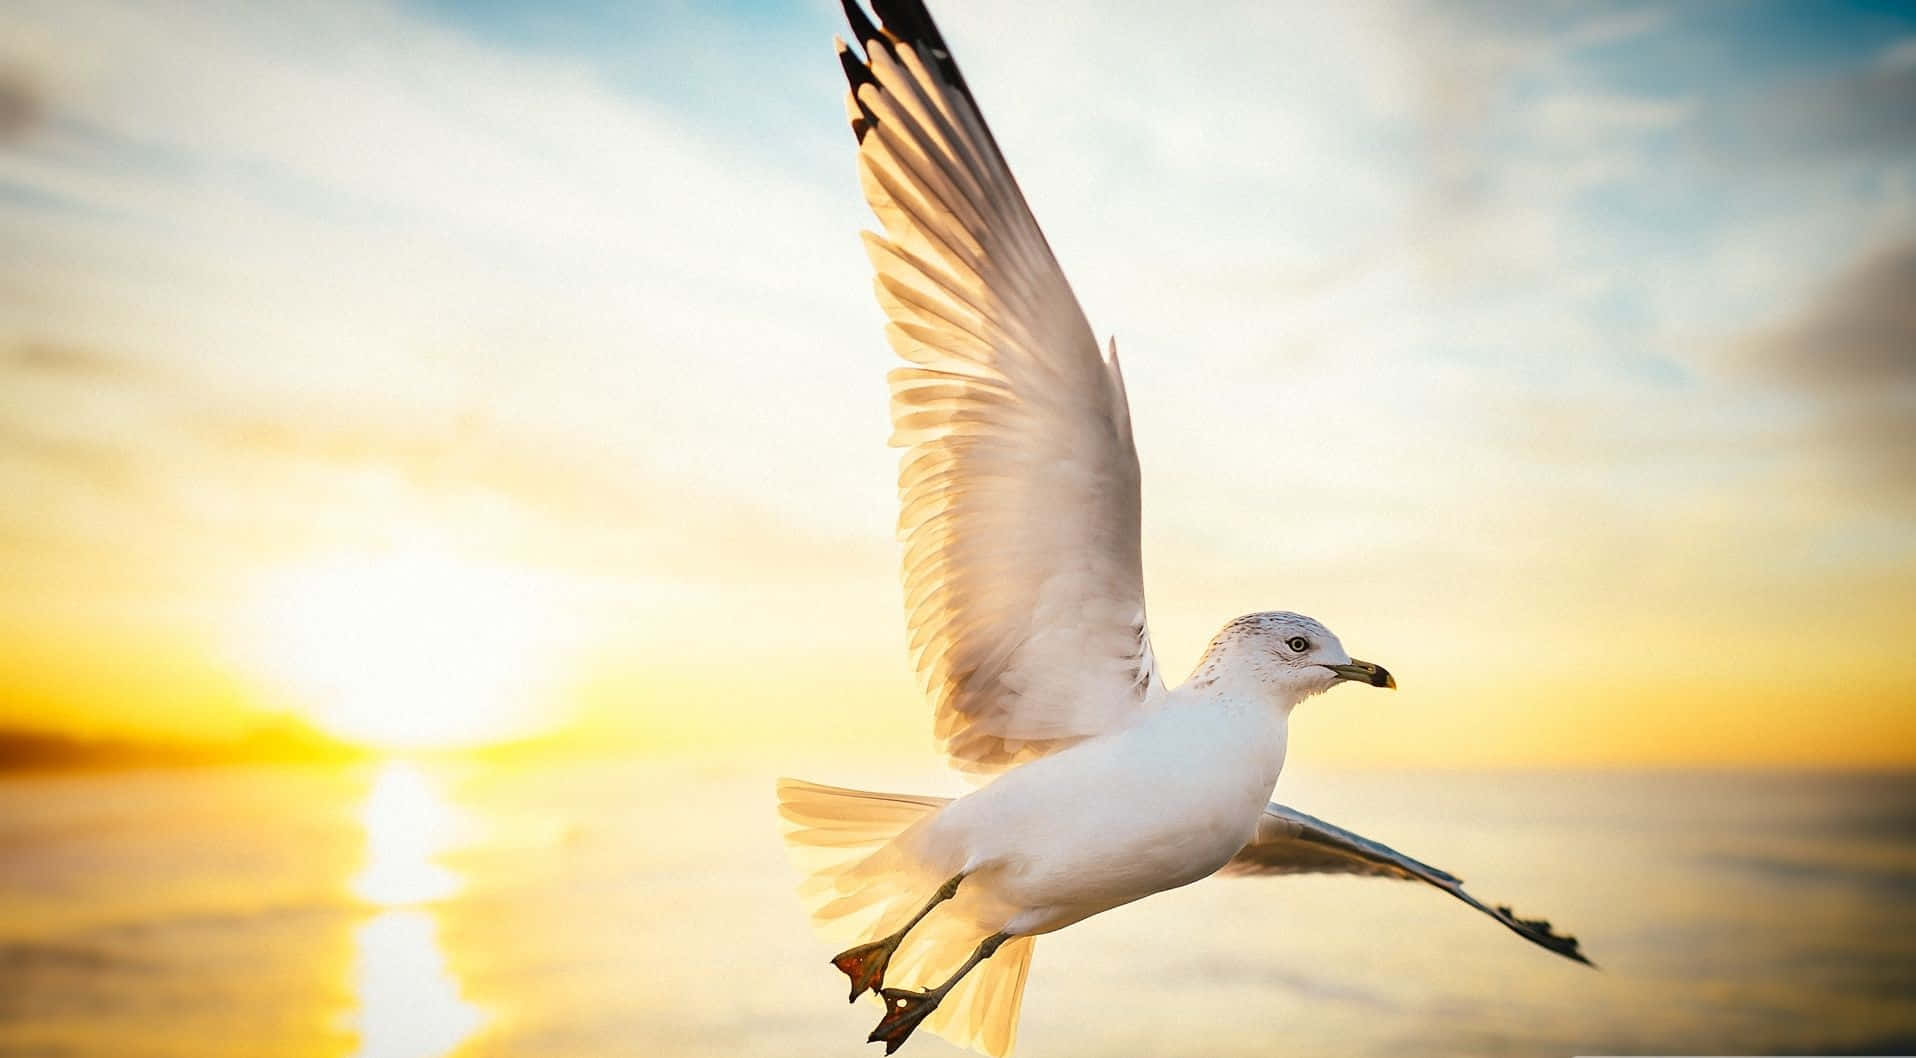 Caption: Majestic Seagull Soaring In The Sky